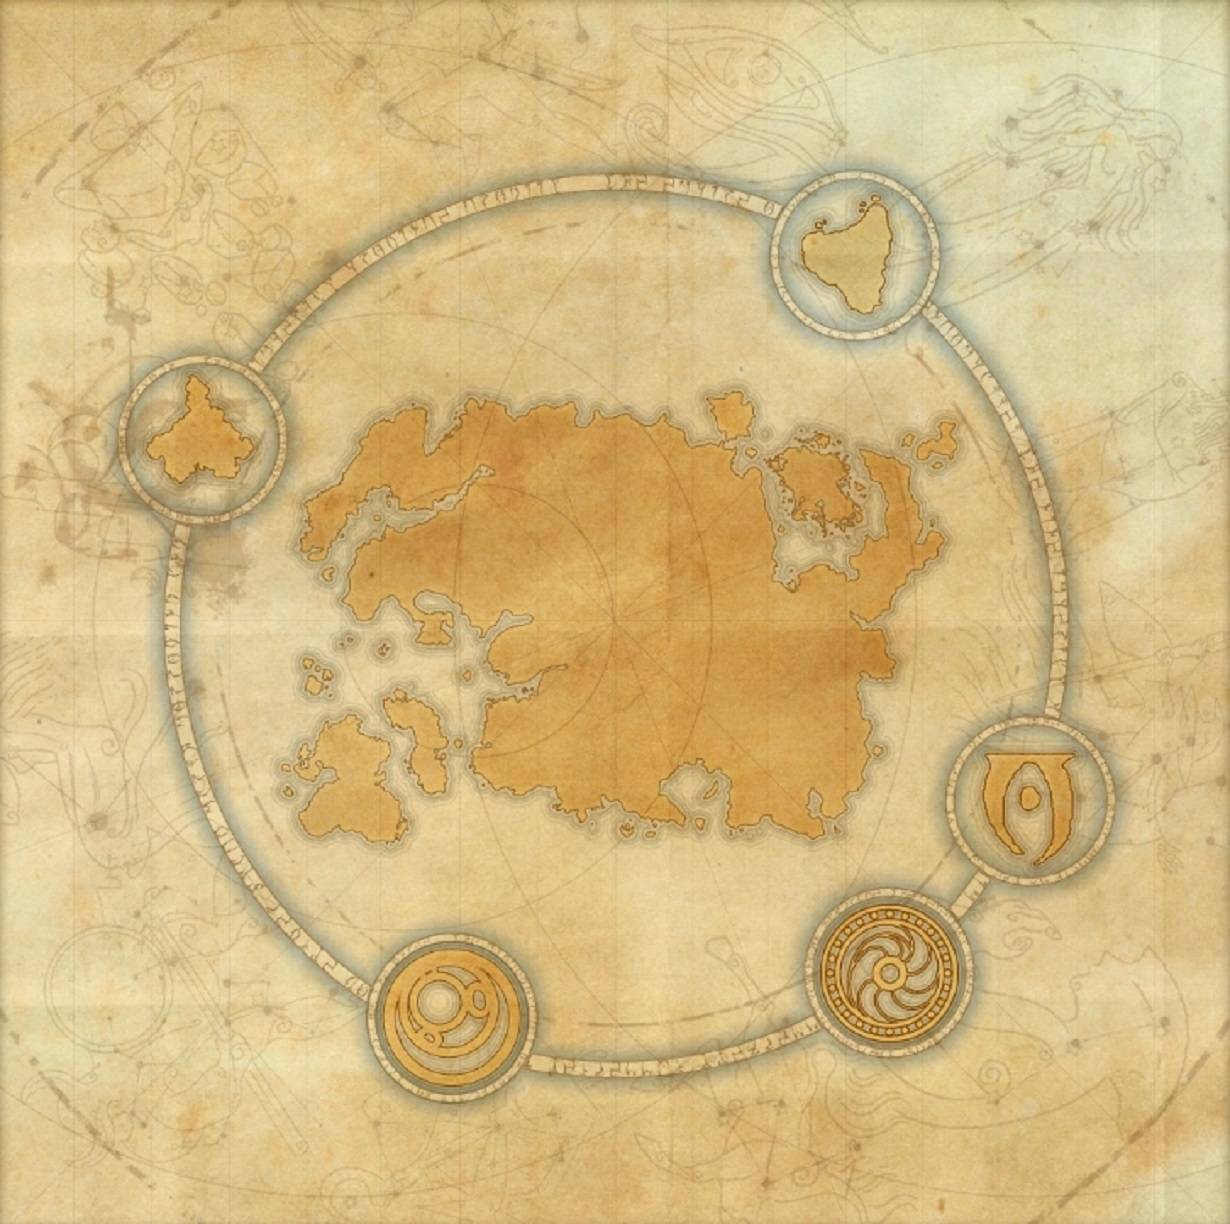 ESO Map with Filters for PC/Console - Skyshards, Lorebooks, PsijicLocations and more - ESO Hub - Elder Scrolls Online